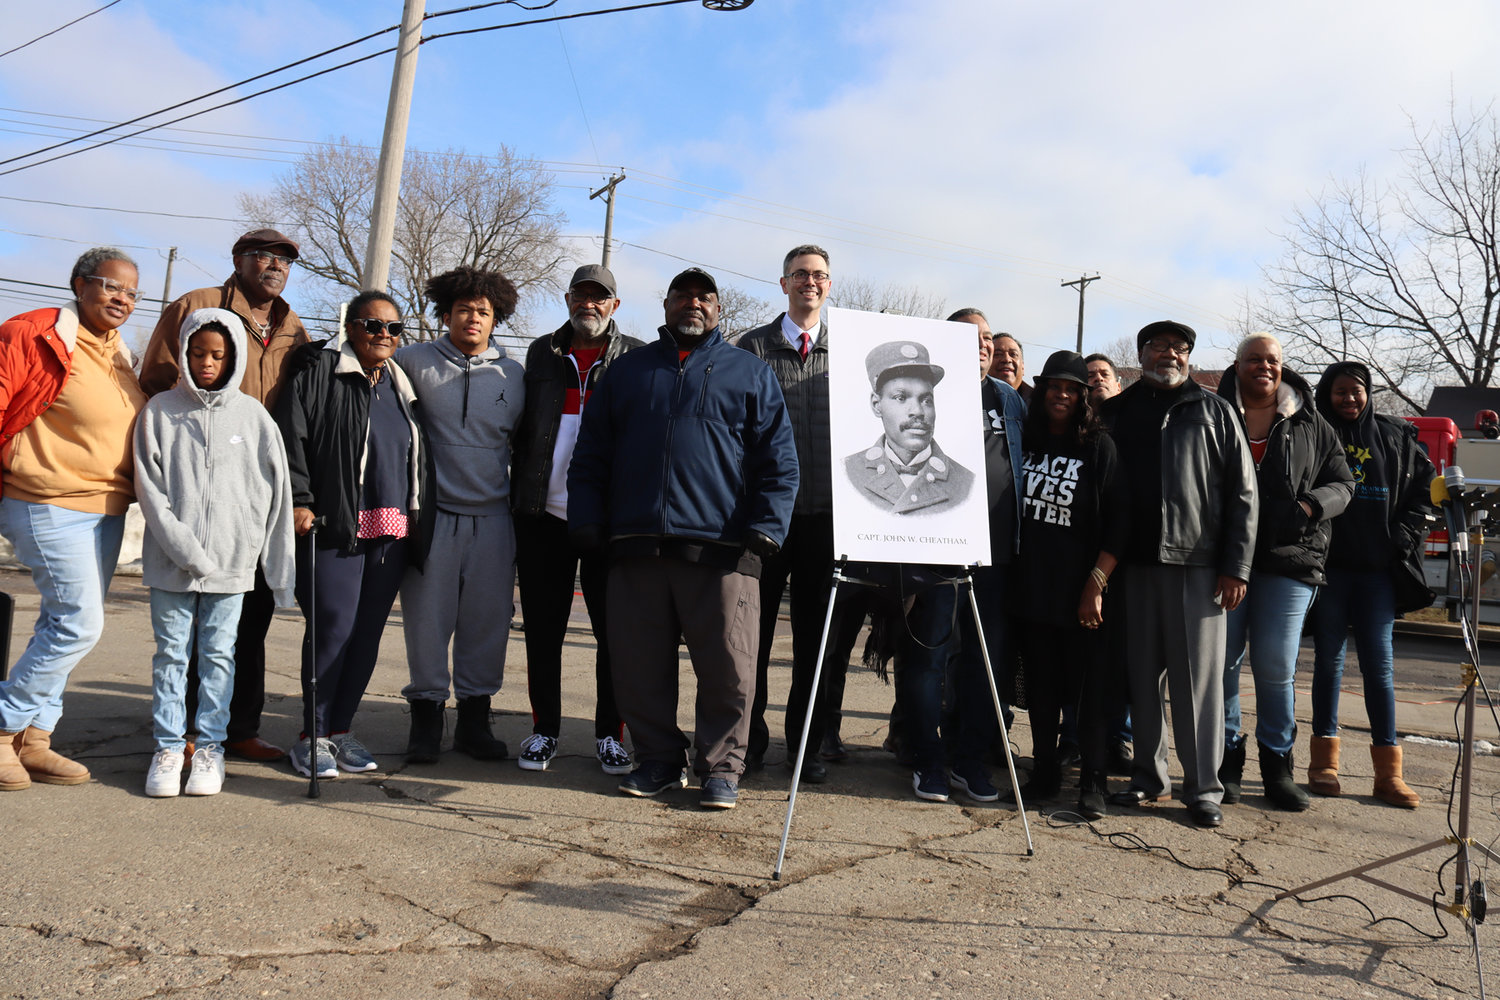 The descendants of John Cheatham, the city’s first Black fire chief,  gather to rename Dight Ave. on March 17, 2022.  At far right is lifetime Longfellow resident Tammy Crockett, who said, “It was awesome” to see the new name be unveiled, honoring her great-great-great-great uncle. Her grandson, 11-year-old Levonte Stephens (in grey sweatshirt), helped during the ceremony when the new name was unveiled from behind the old one. “It was fun to pull the rope off,” he said. (Photo by Tesha M. Christensen)